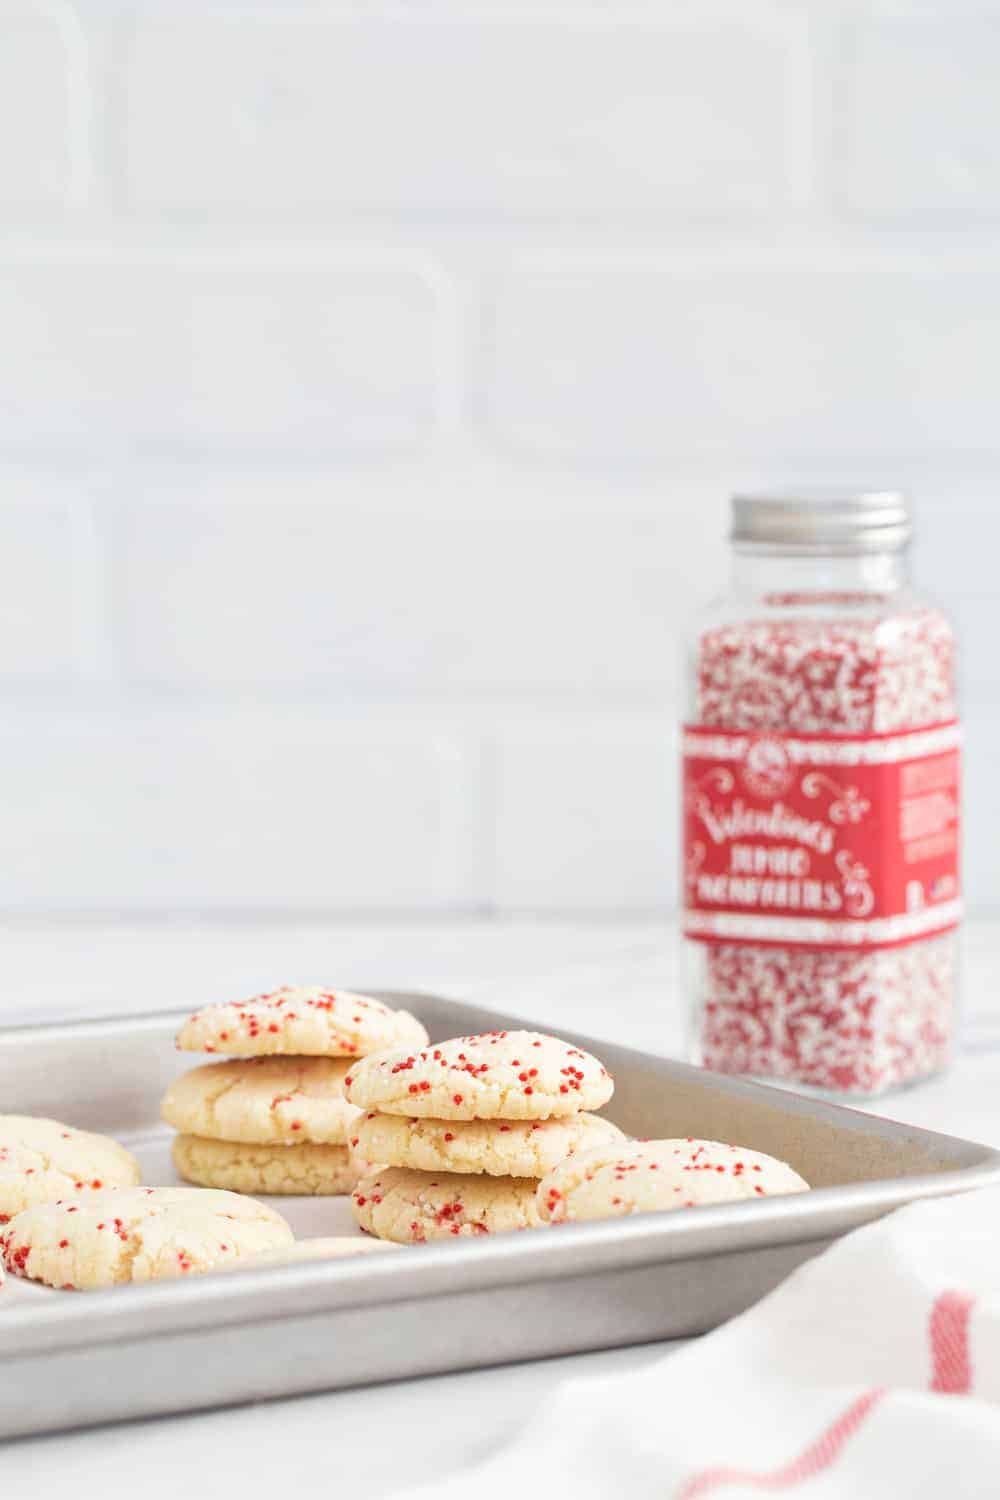 Easy Sugar Cookies come together in a snap! No chilling, rolling, or cookie cutters required! If you love sugar cookies, these are a must-make!